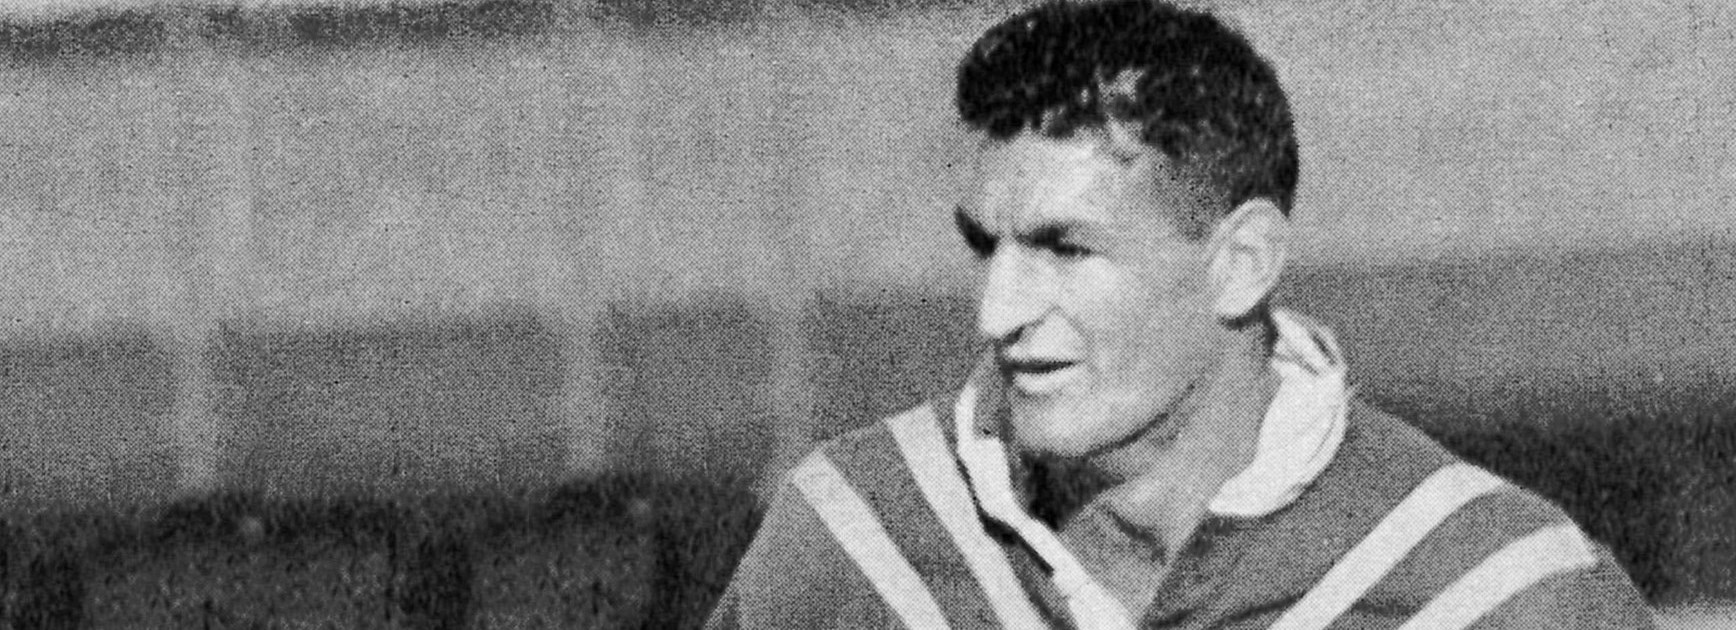 Rugby League Immortal dead at 88